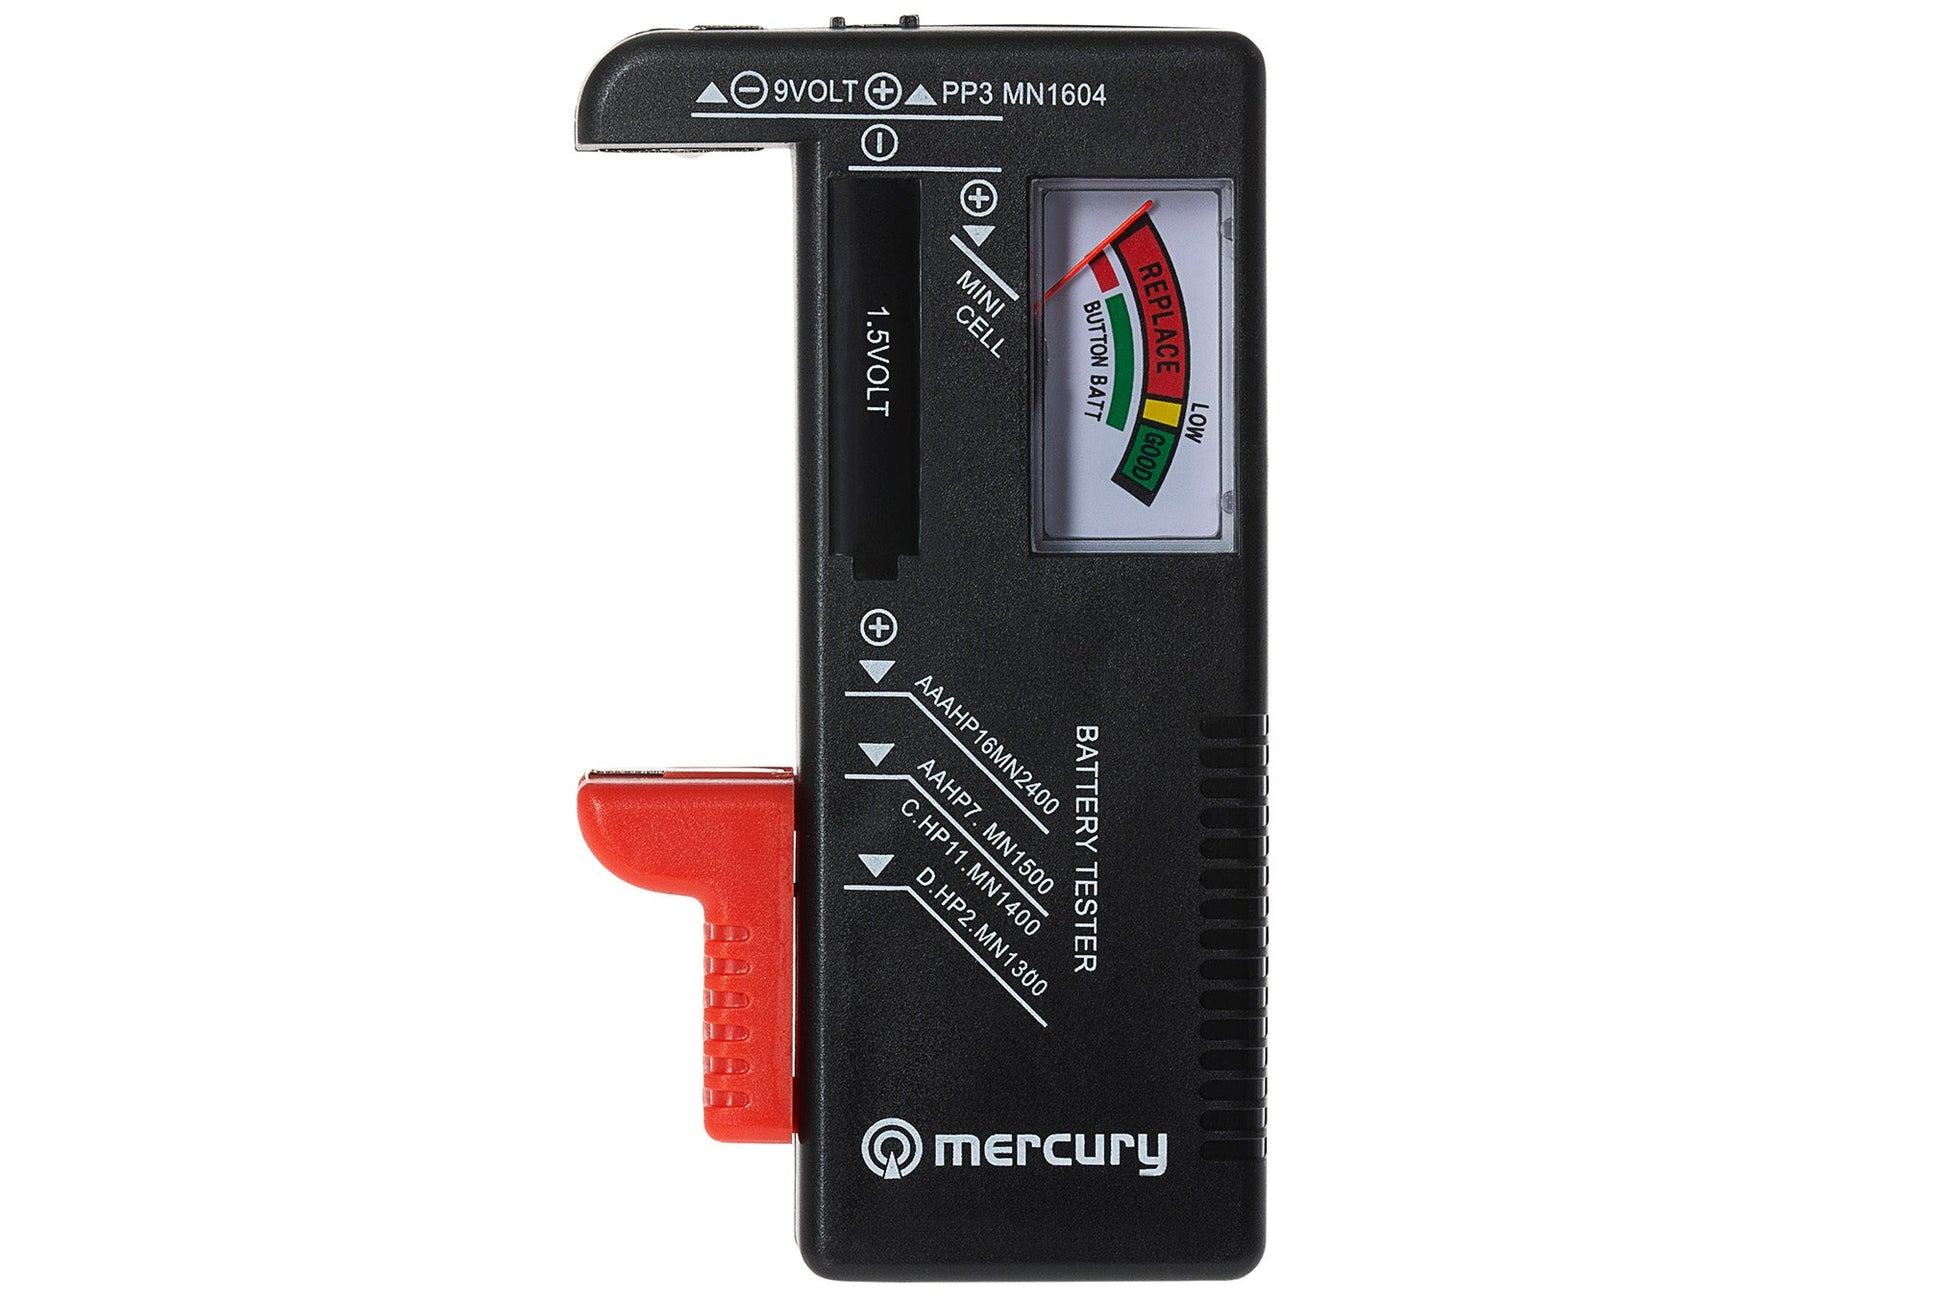 Maplin Mercury Universal Analogue Battery Tester for AA, AAA, C, D, 9V PP3 & Coin Button Cells - maplin.co.uk